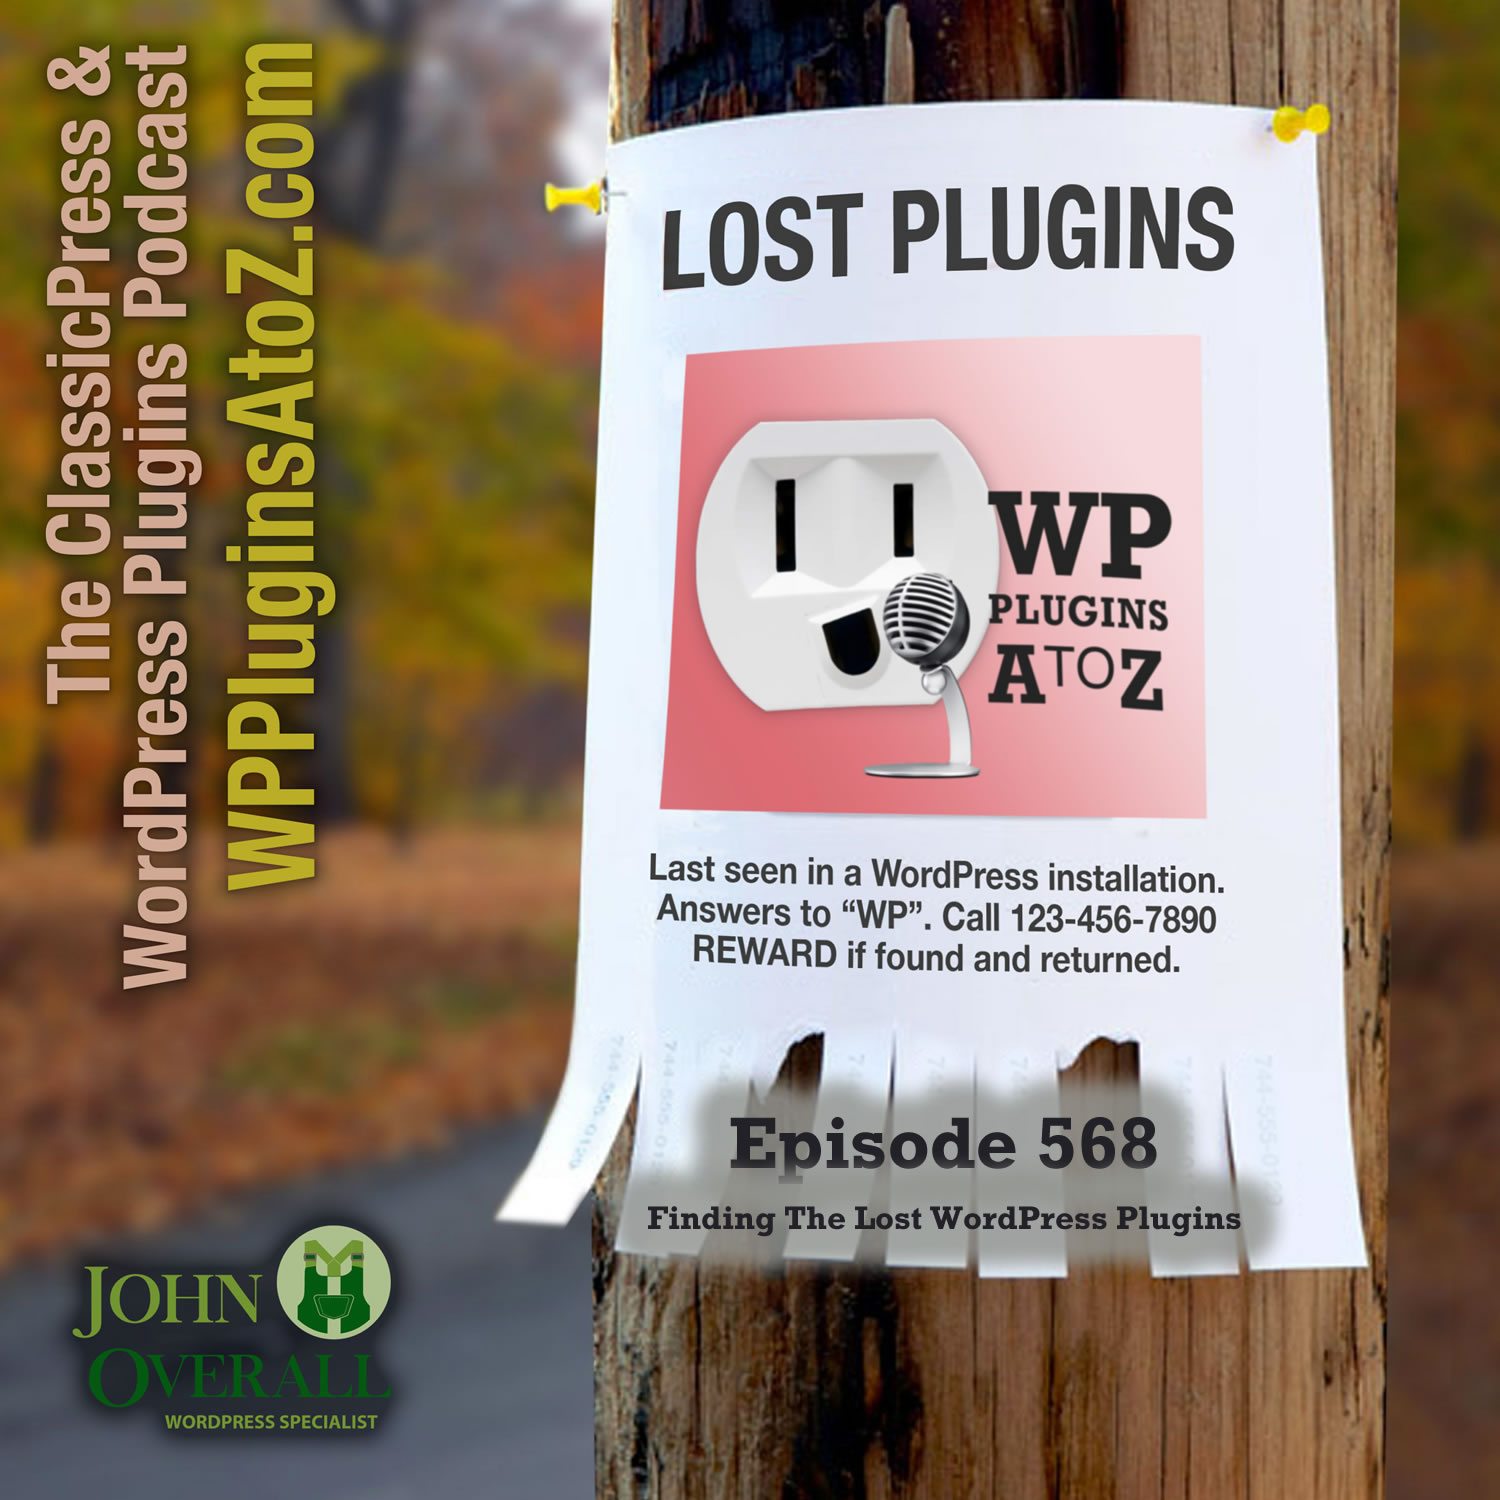 It's Episode 568 and we have plugins for Freezing Content, Jellyfish Counter, Last Login, Scanning FMS, Cloning yourself, Searching Replacement... and ClassicPress Options. It's all coming up on WordPress Plugins A-Z!